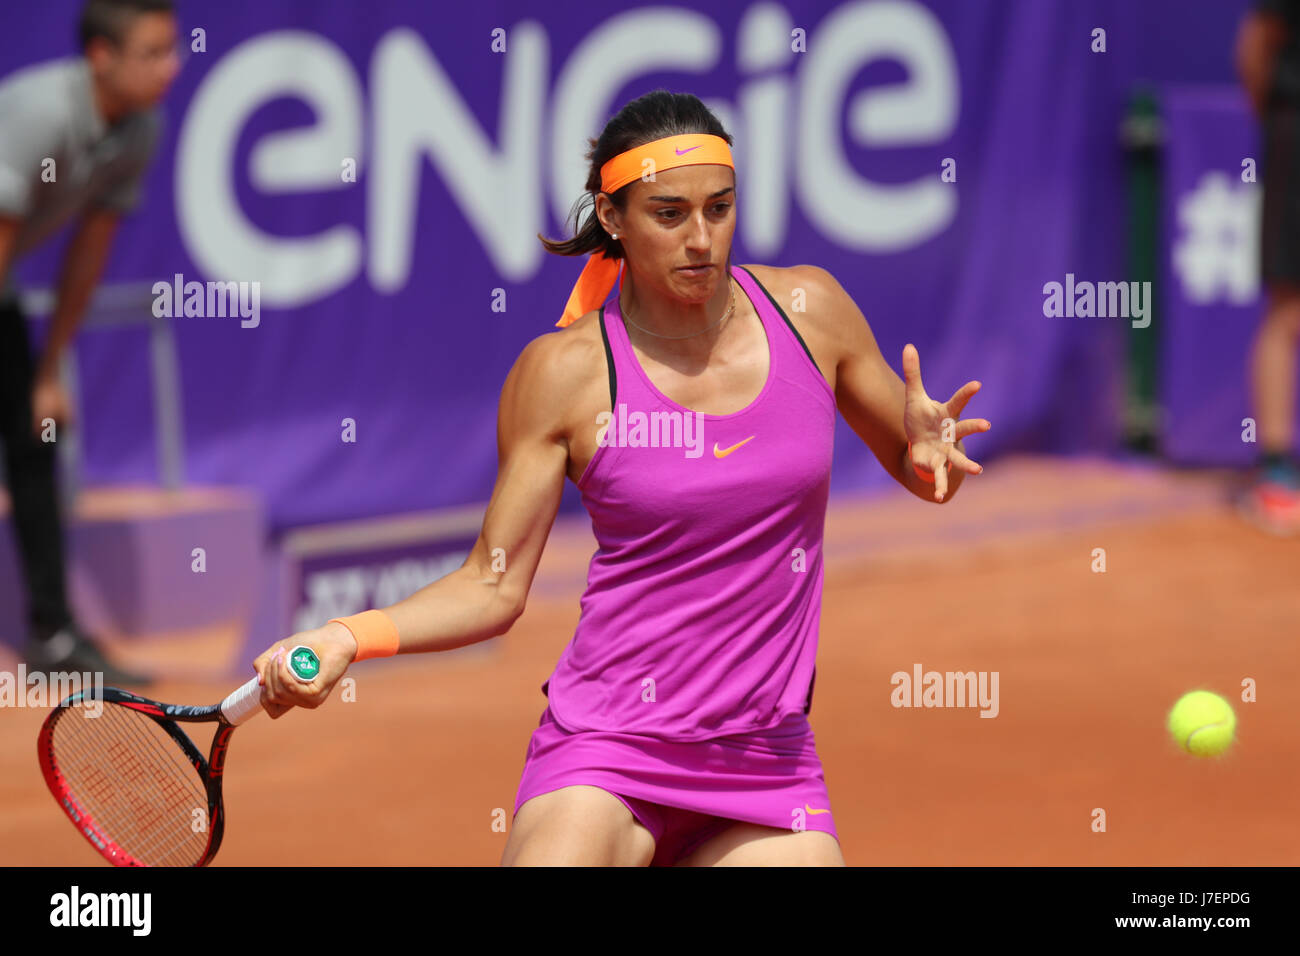 Strasbourg, France. 24th May, 2017. French tennis player Caroline Garcia is  in action during her match in the 1/8 final round of the WTA tennis  Internationaux of Strasbourg vs Polish player Magda